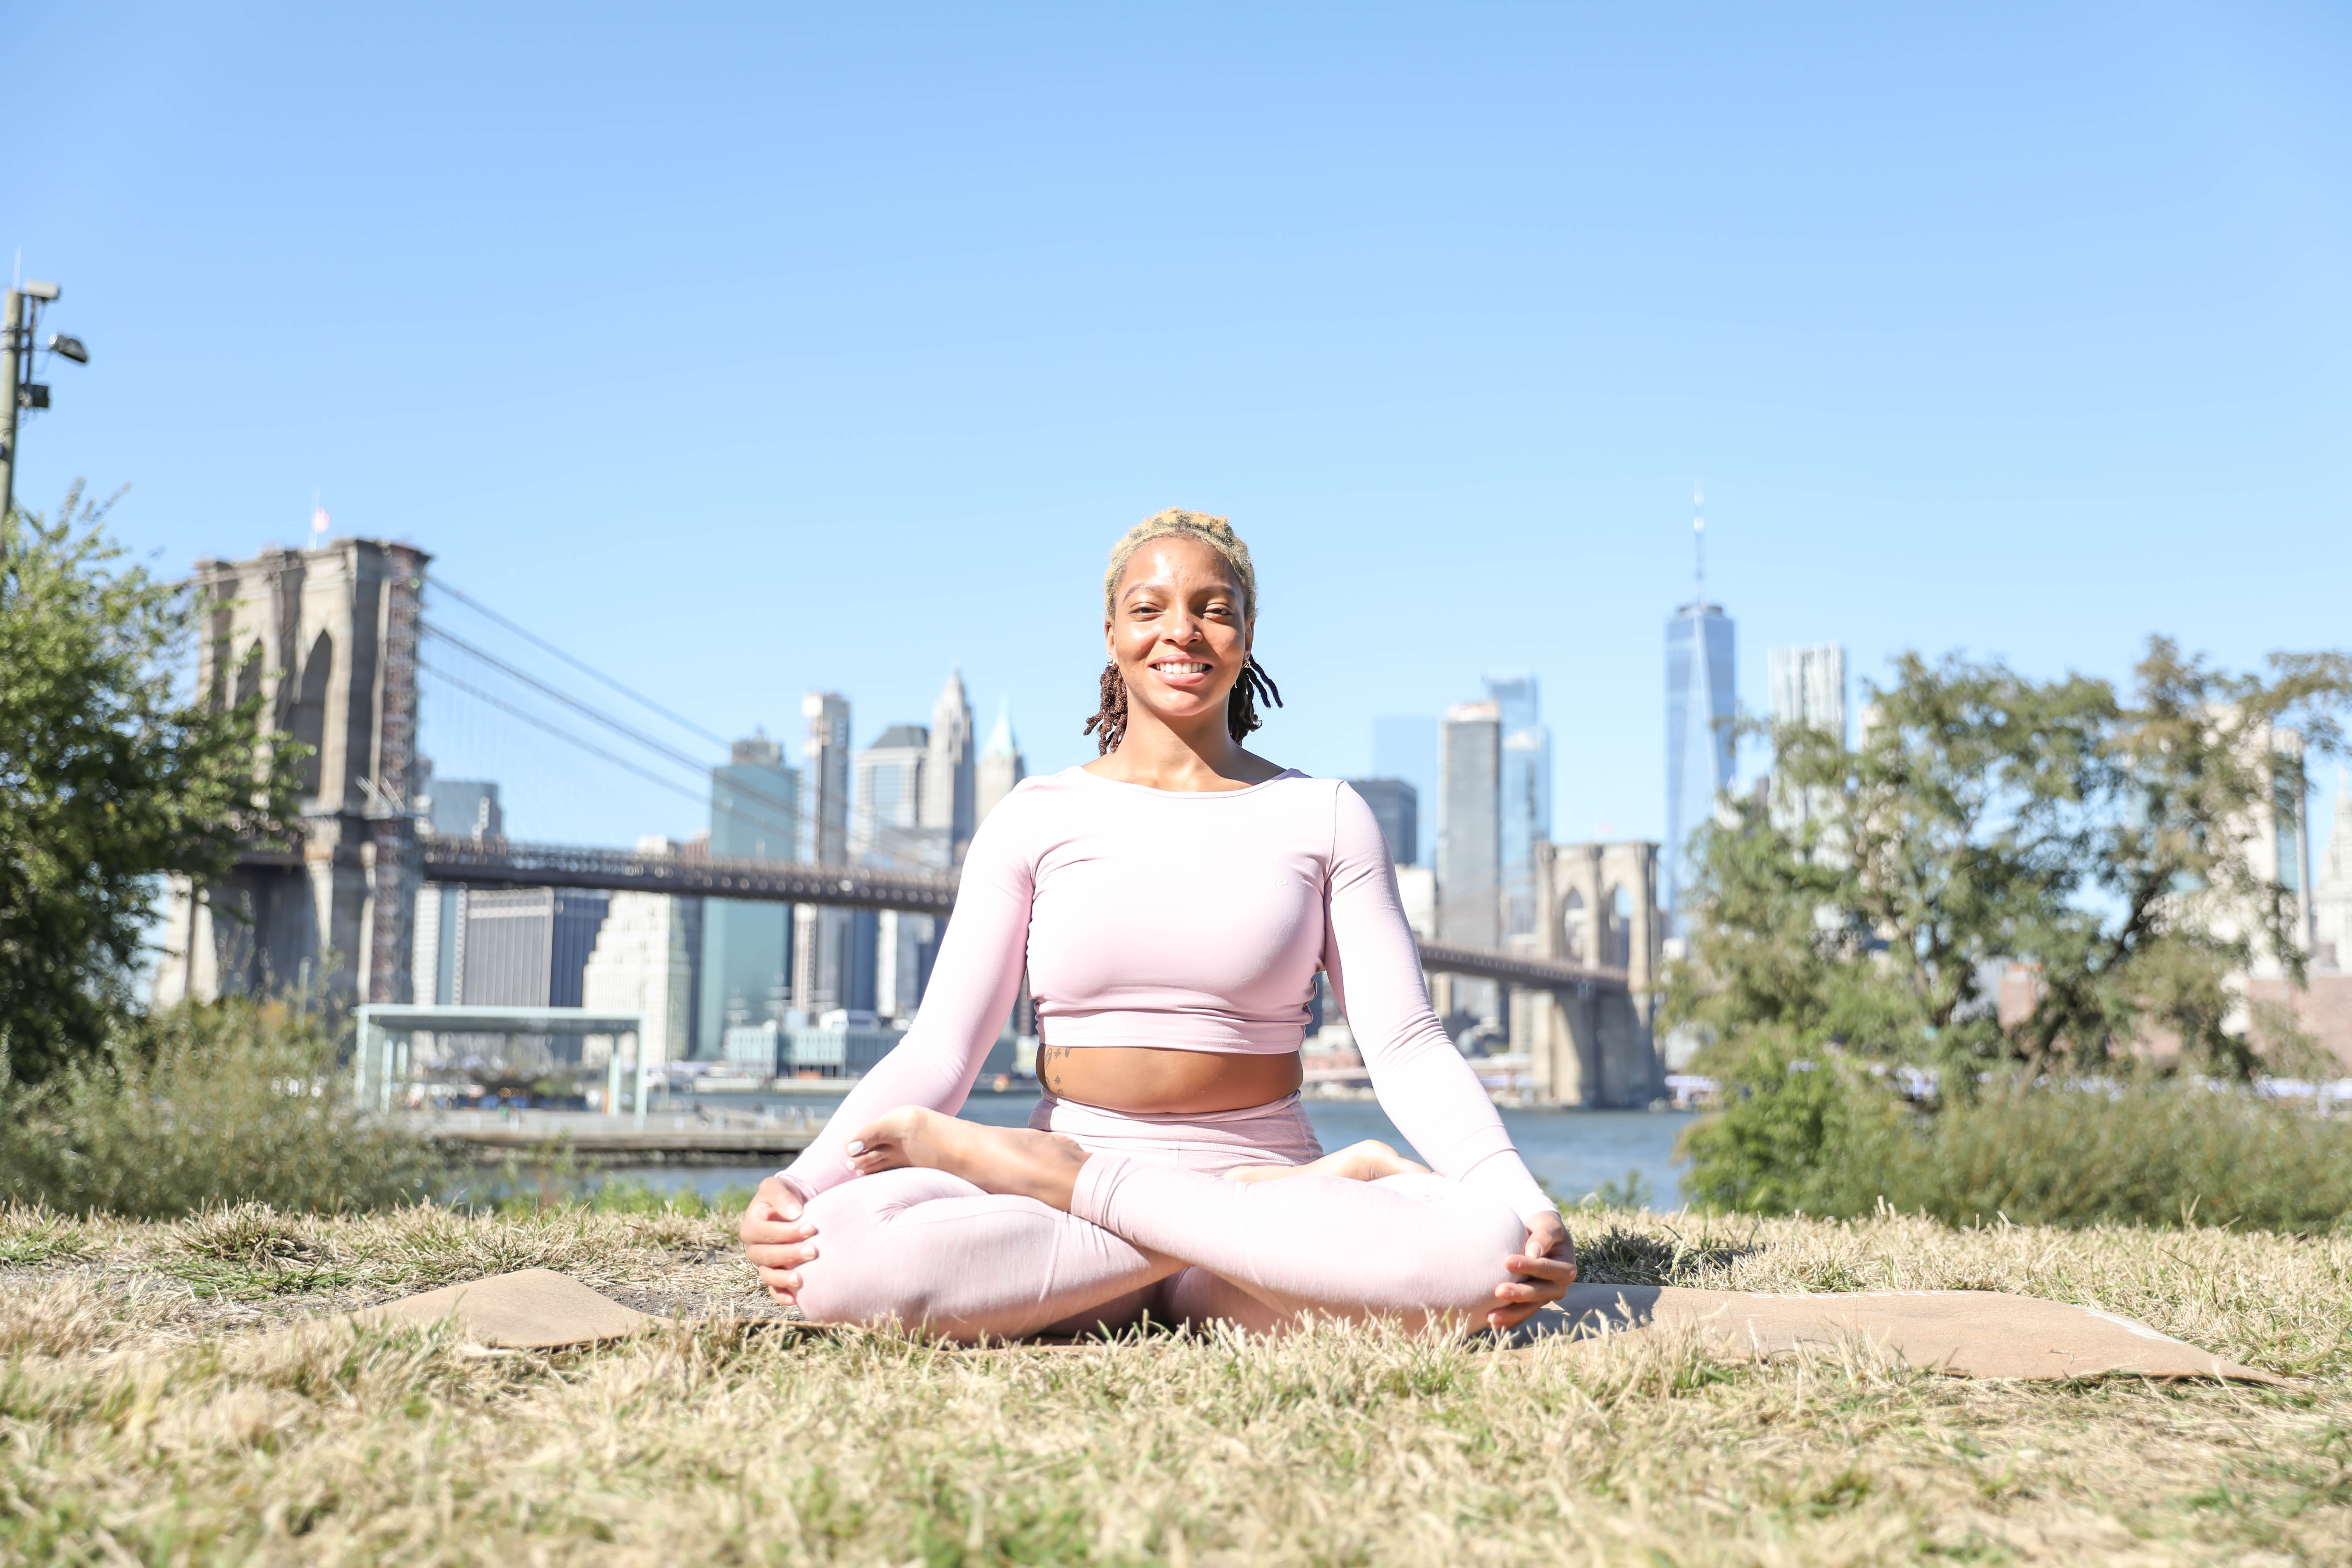 Watch: How These Yoga Instructors Keep Their Composure in New York City's "New Normal"